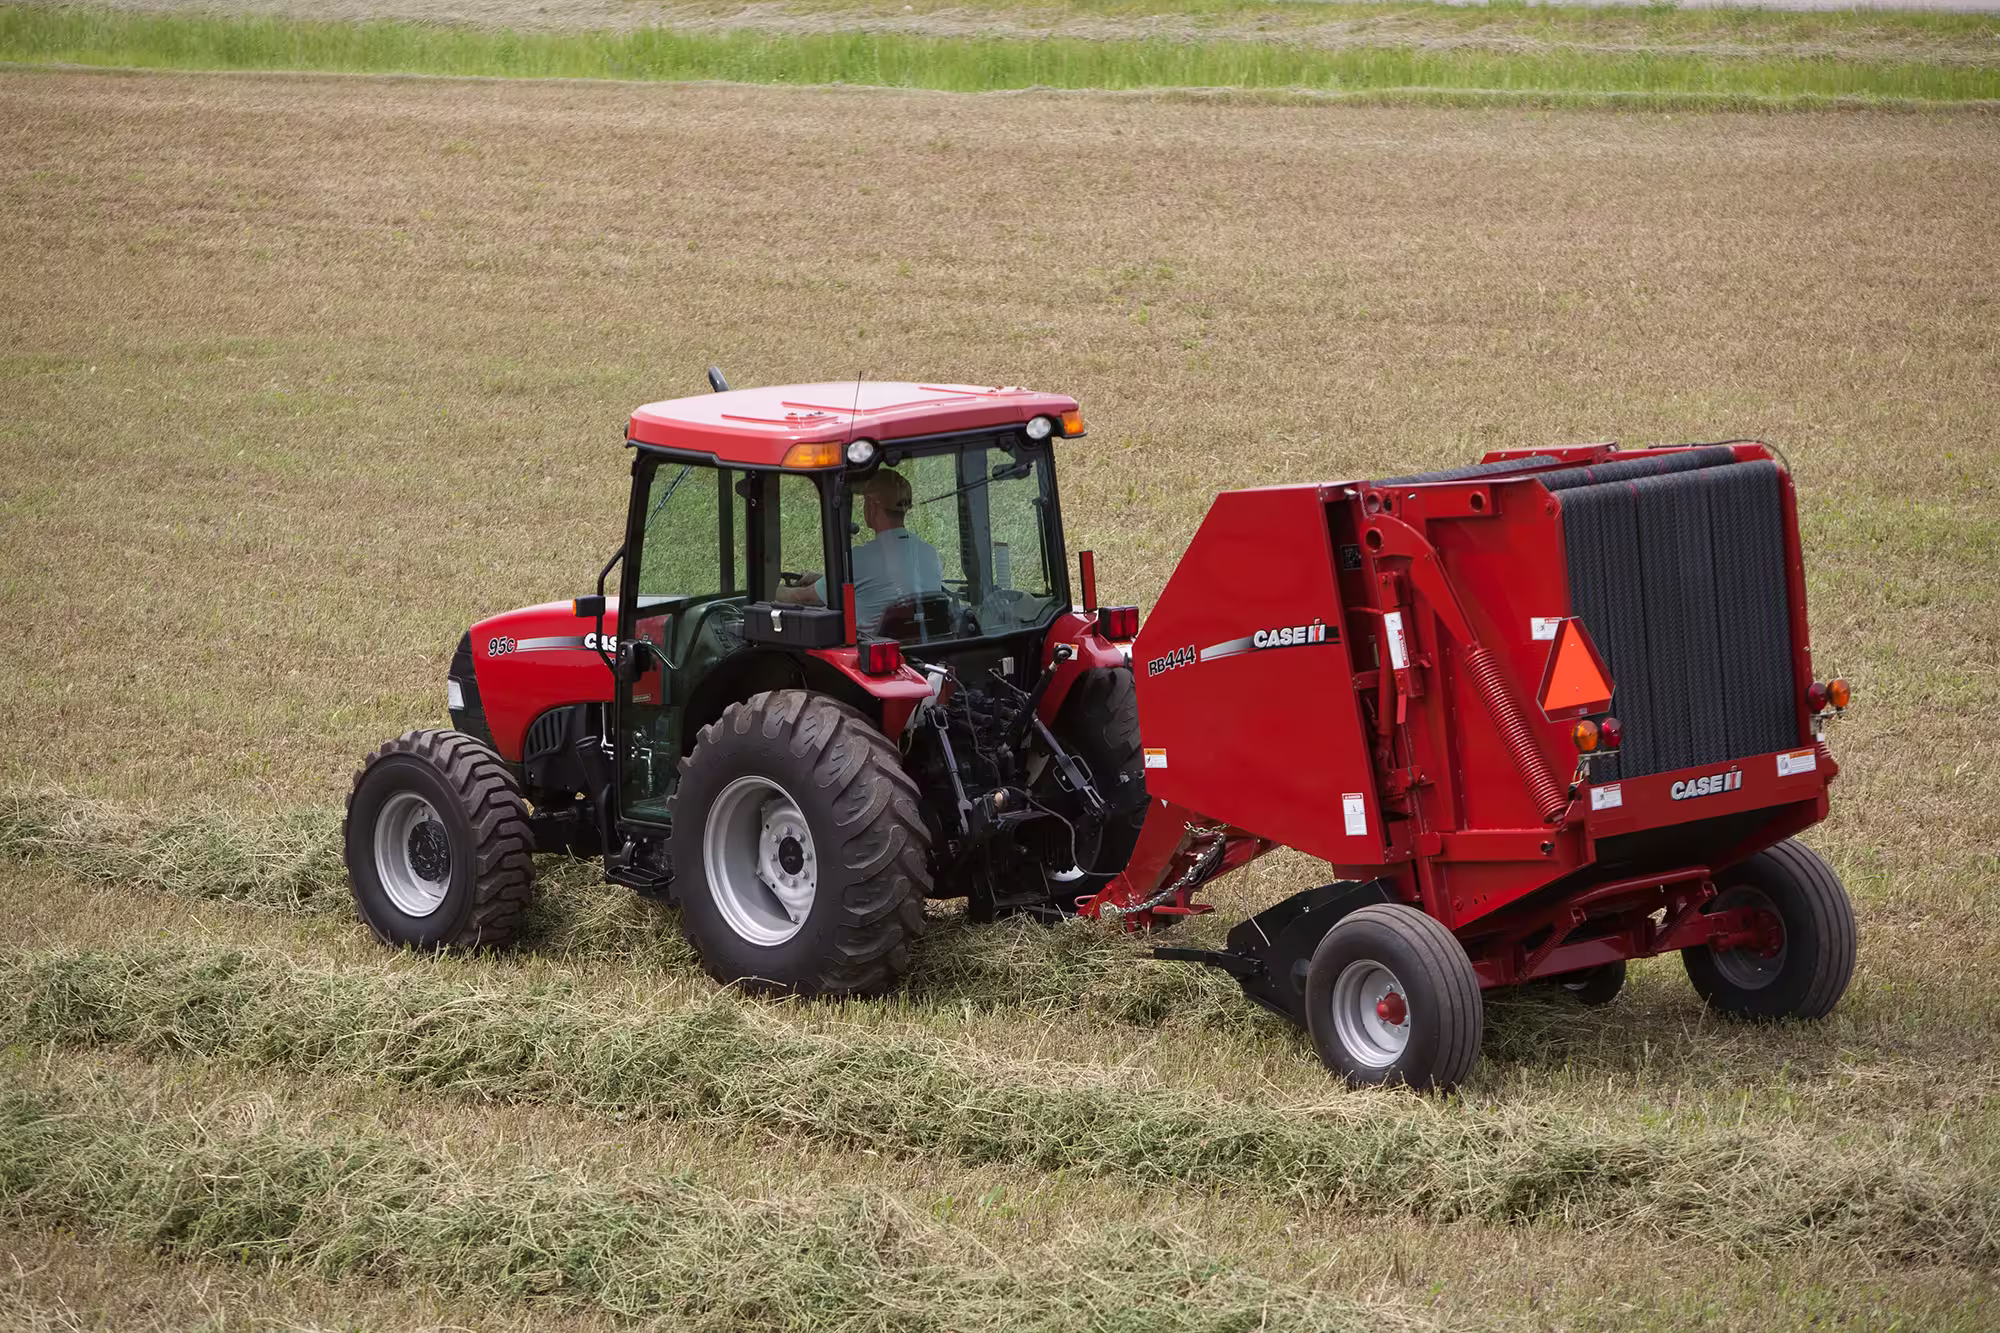 PARTS MANUAL - CASE IH RB444 VARIABLE CHAMBER ROUND BALER DOWNLOAD